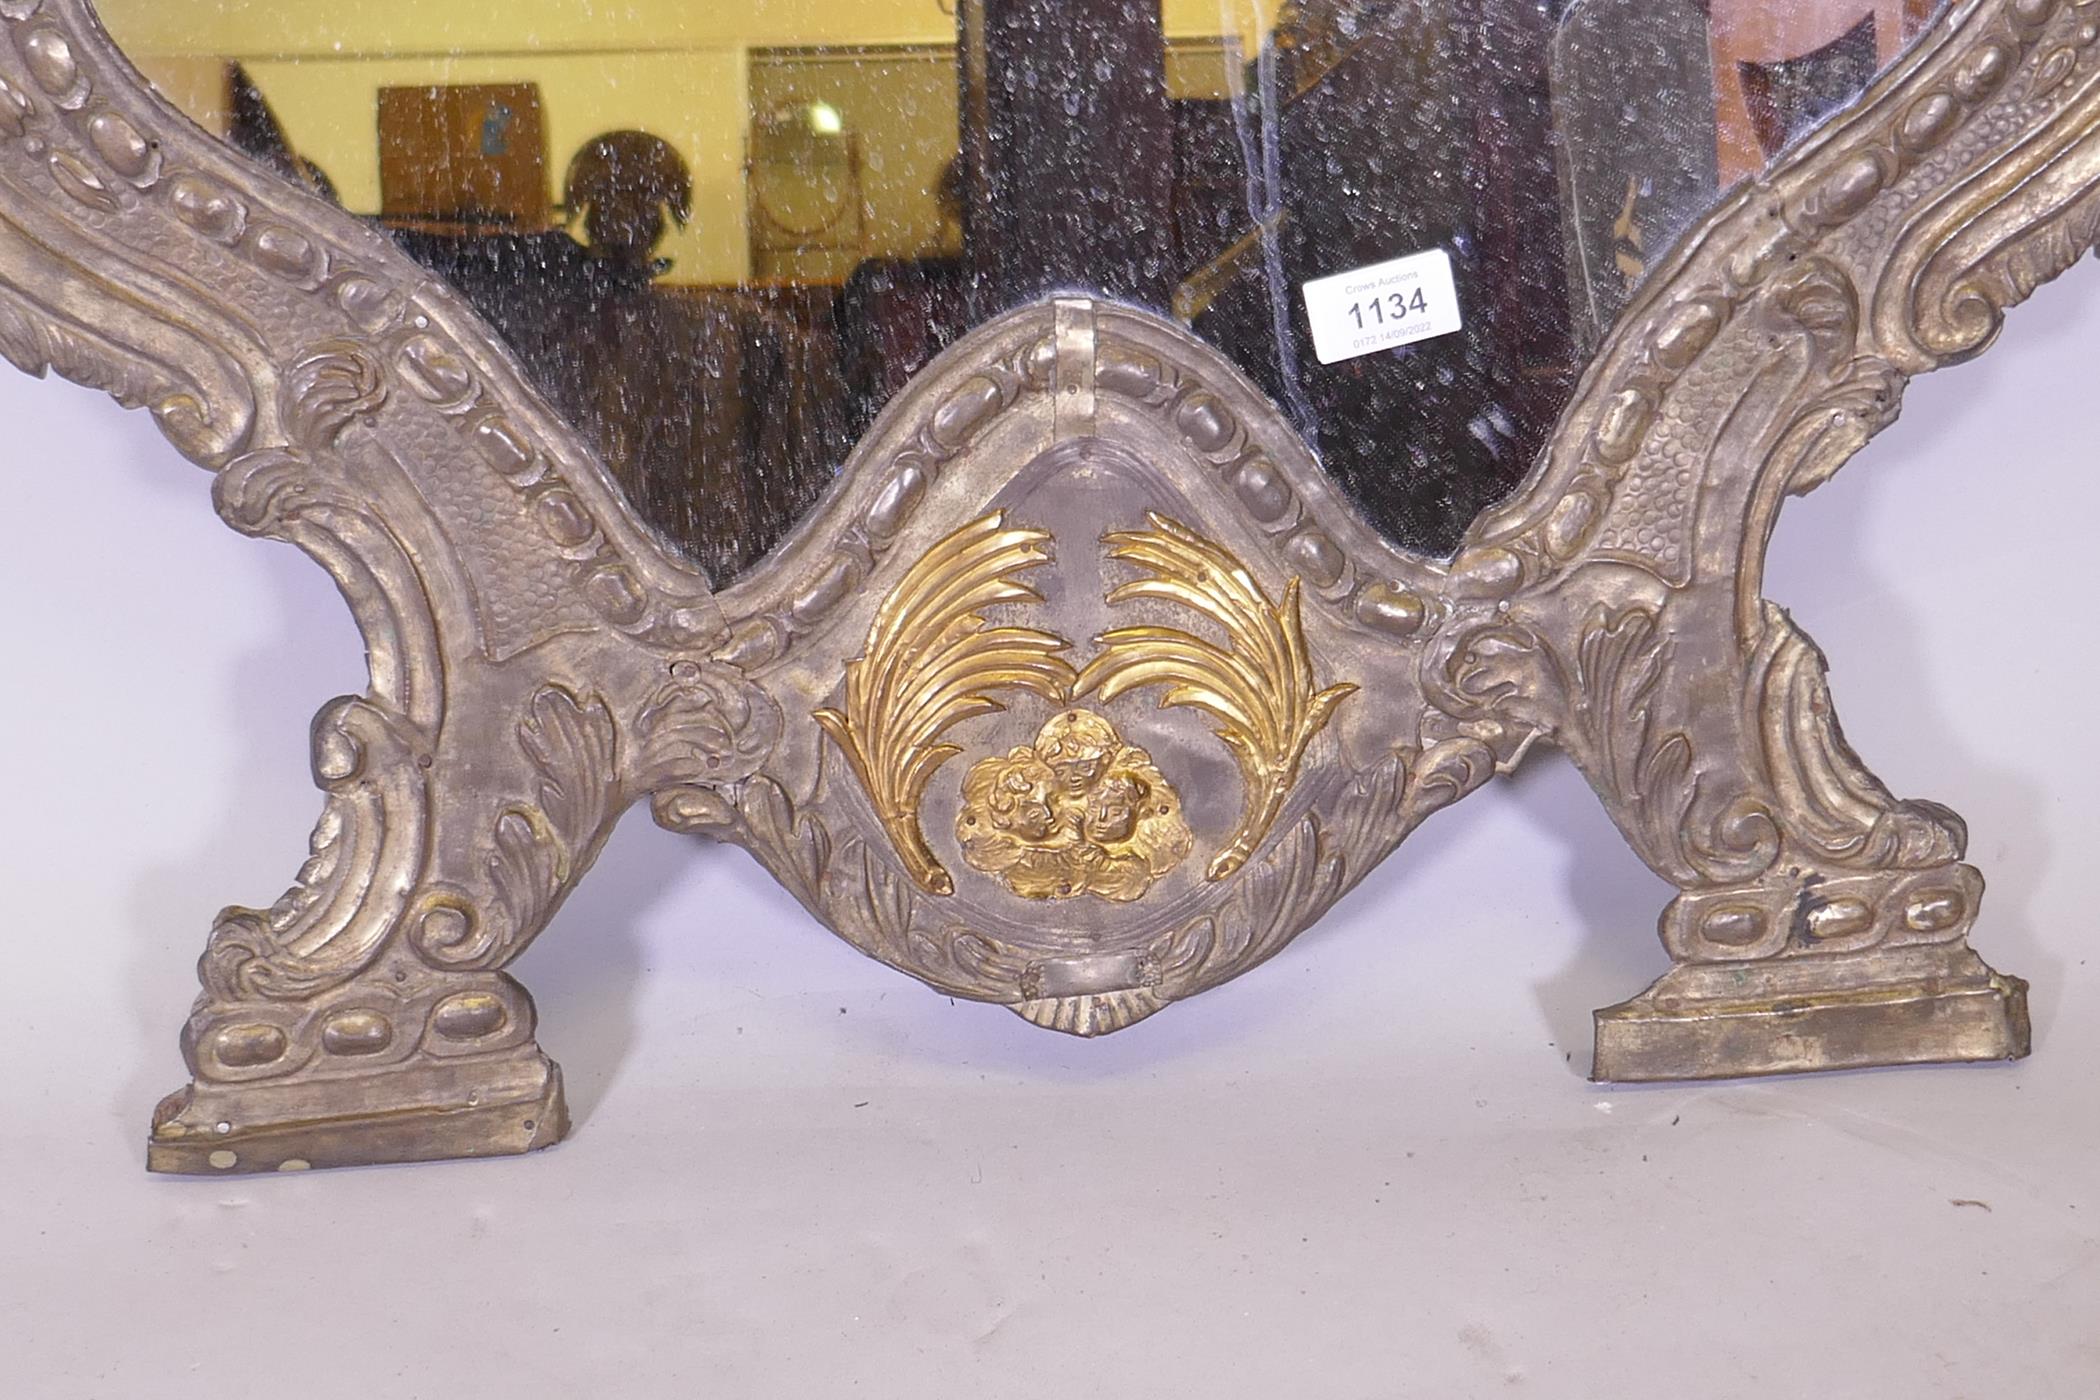 A C19th continental wall mirror, the repousse white metal covers with decorative ormolu mounts, 75cm - Image 3 of 3